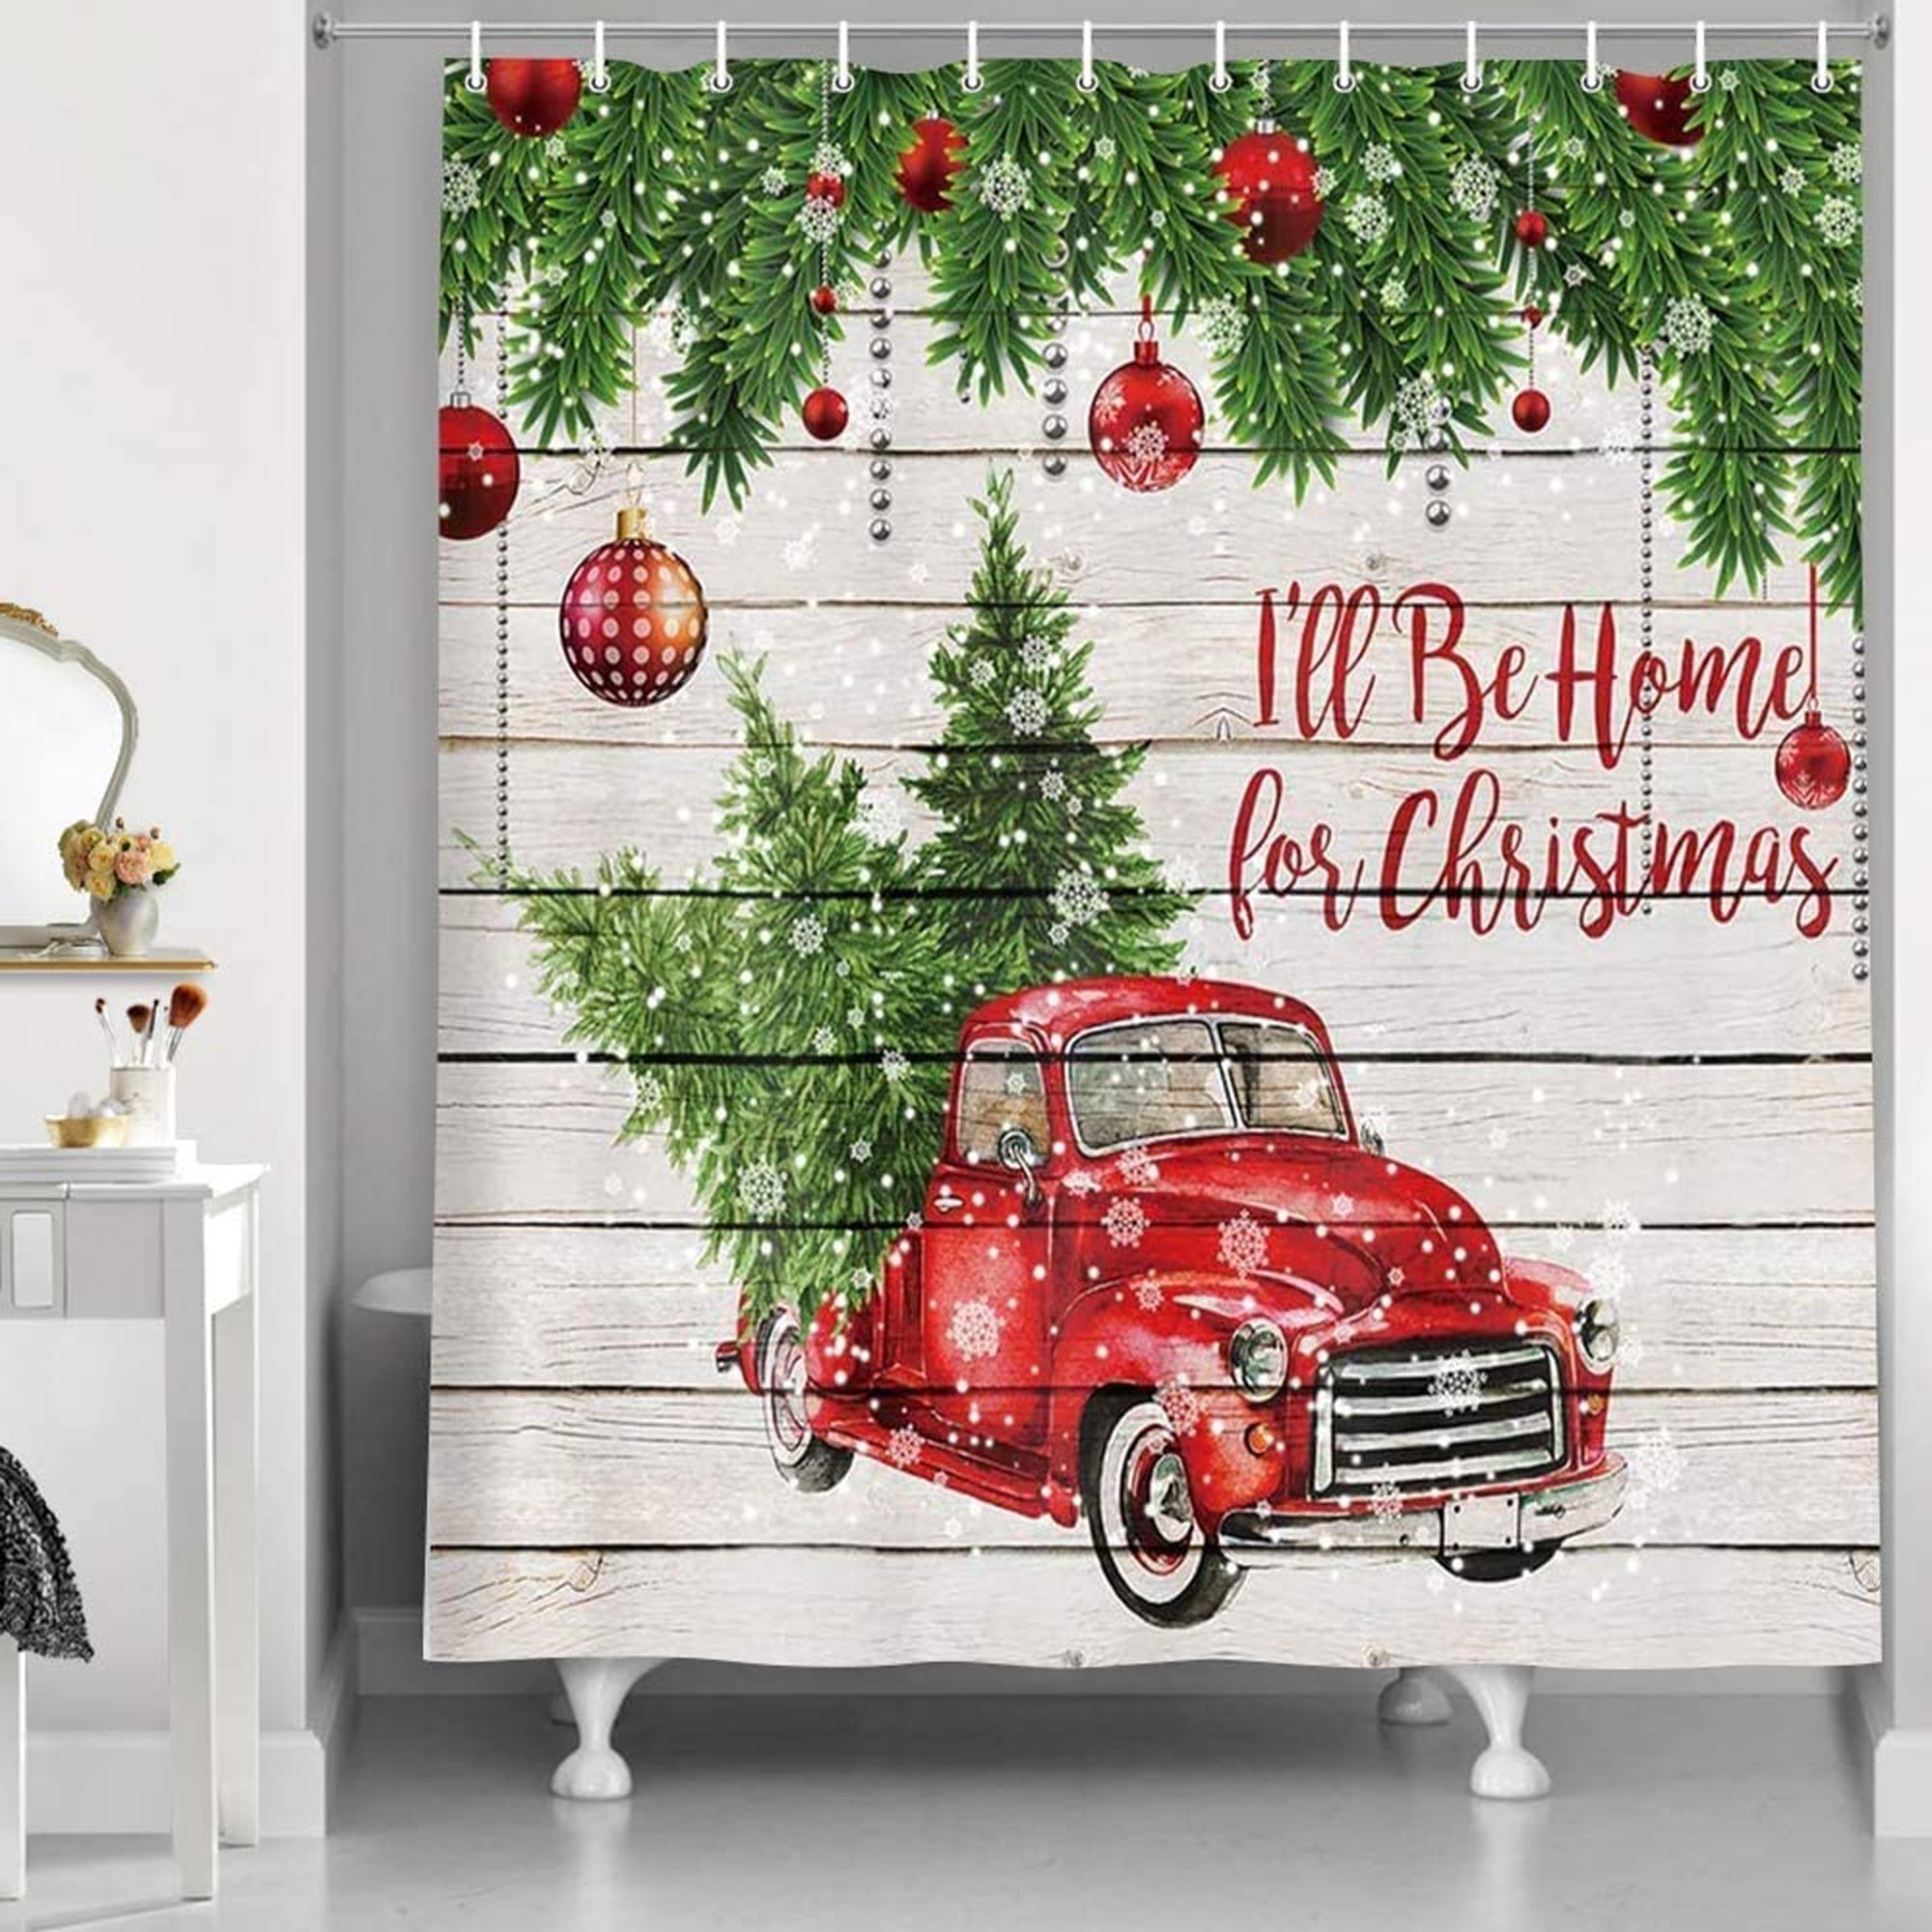 Rustic Wooden Planks Christmas Retro Red Truck Fabric Shower Curtain Set 72x72" 